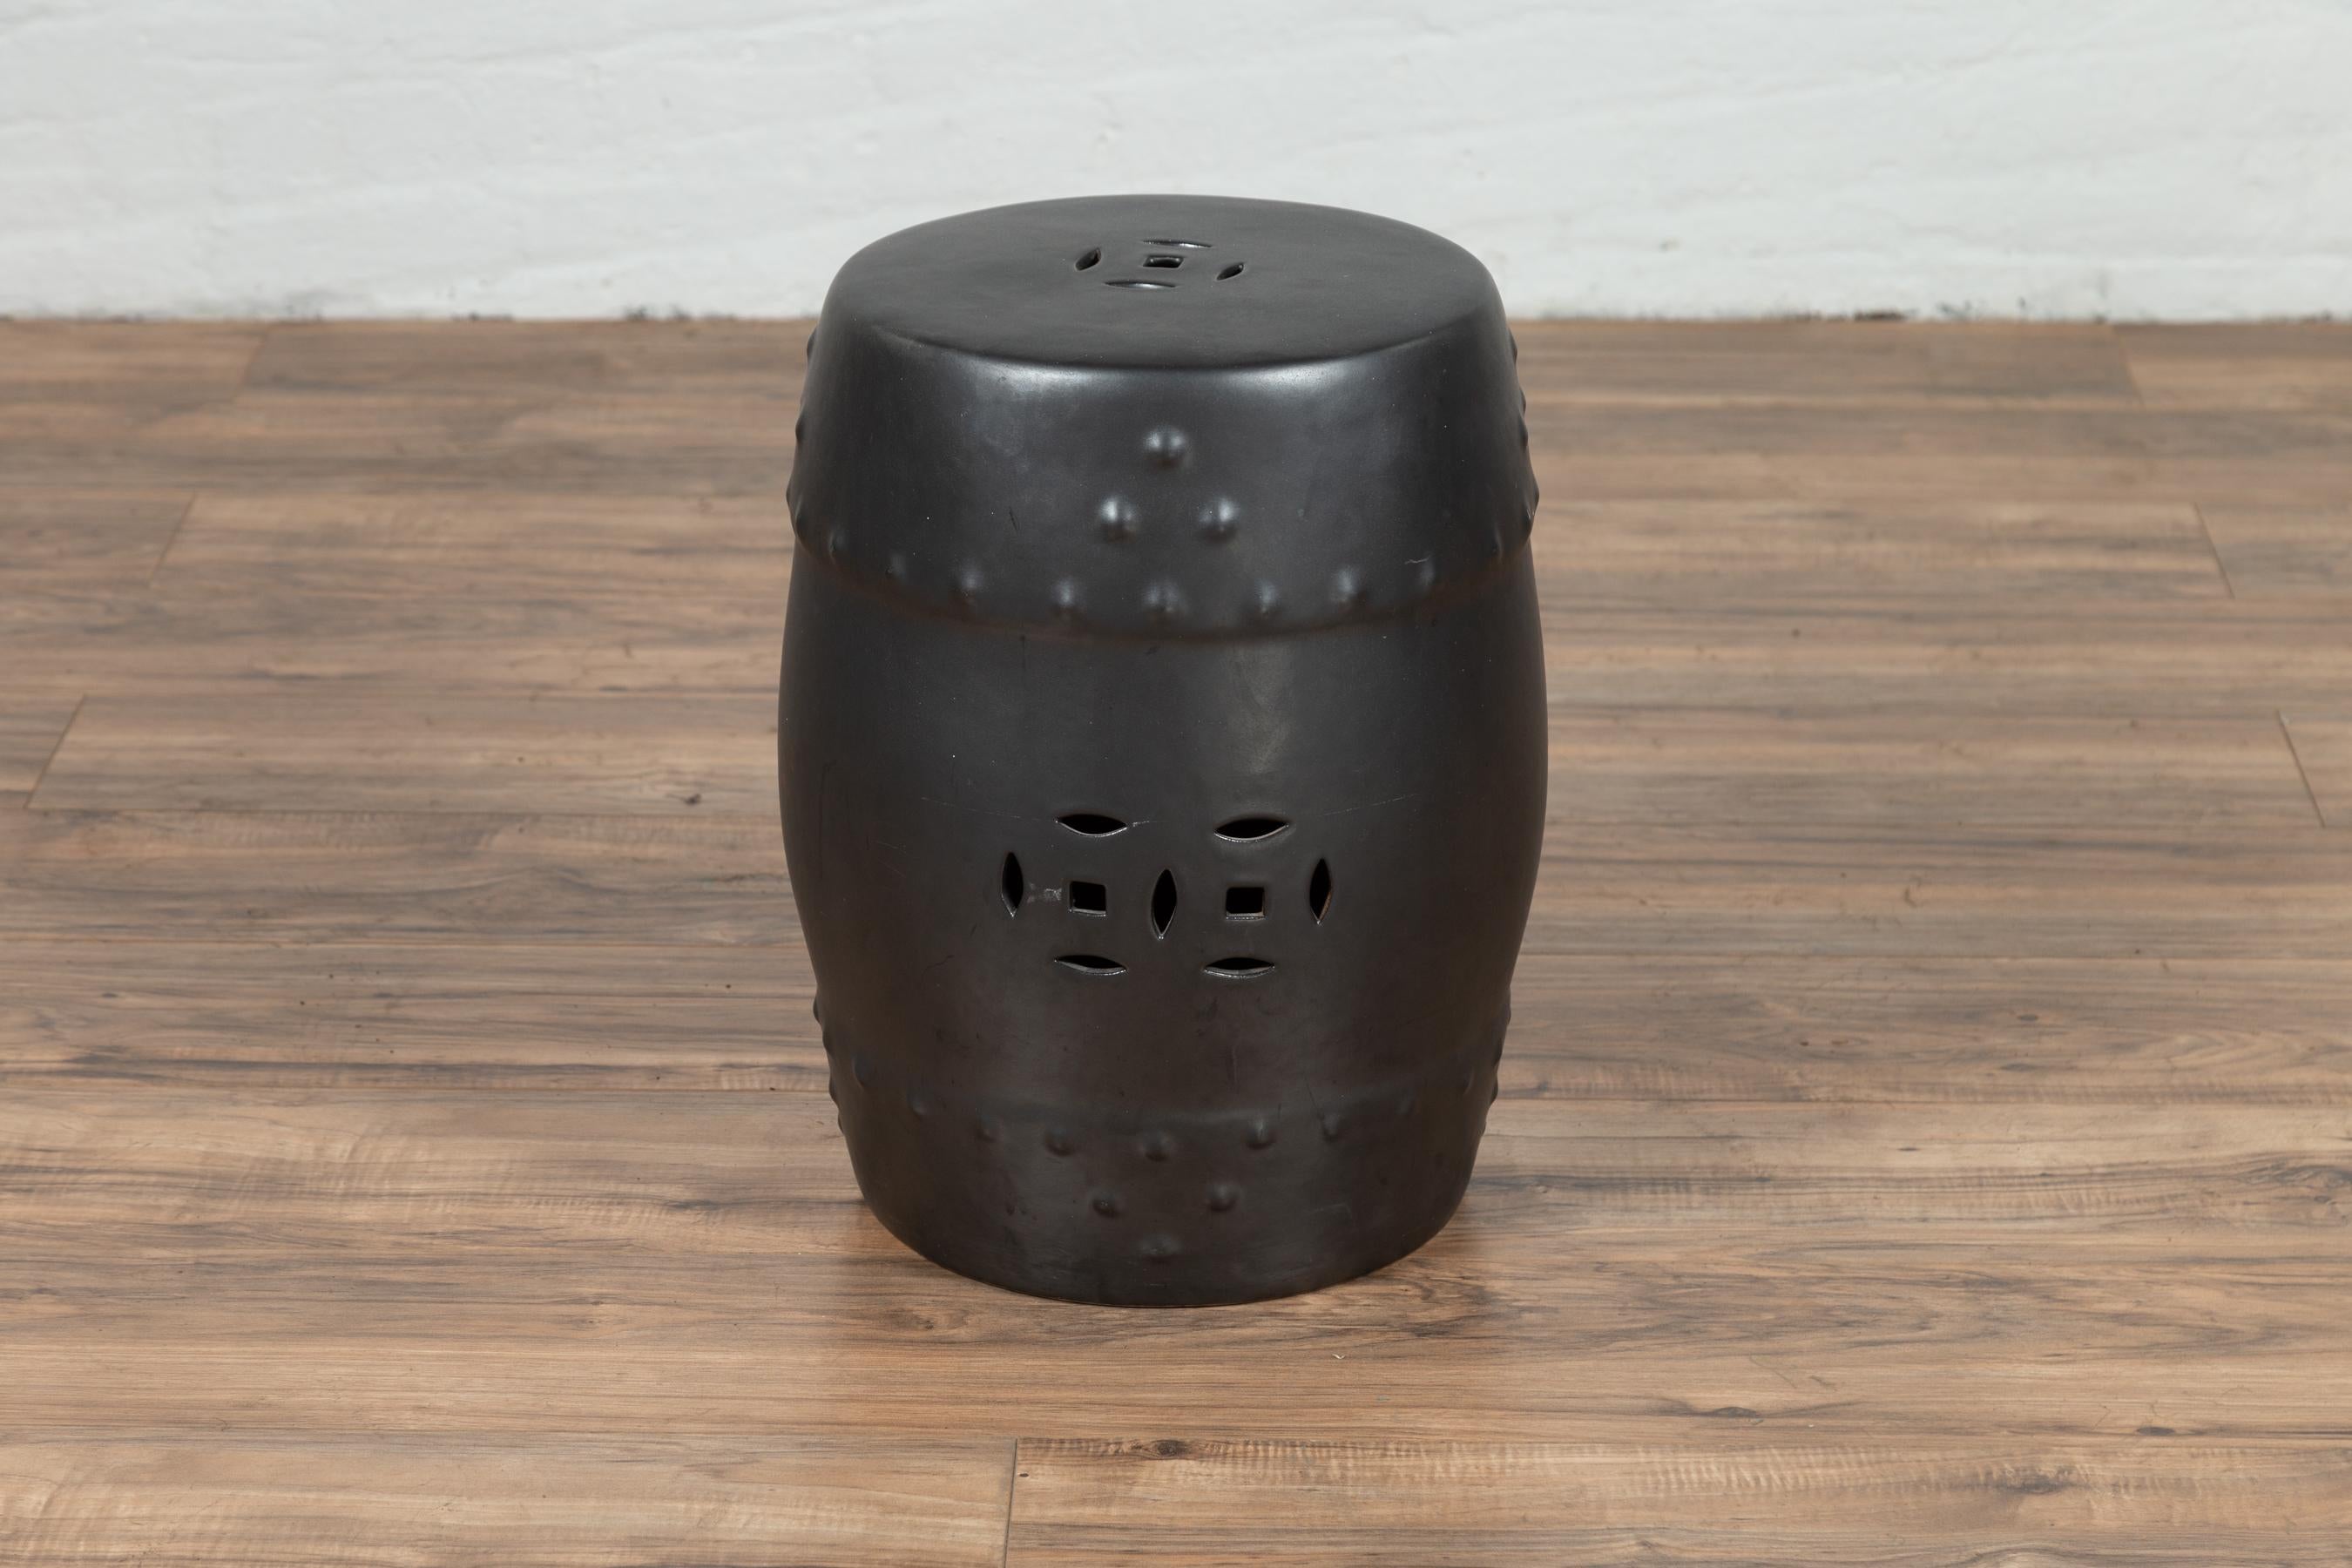 A Chinese contemporary cobalt grey ceramic garden stool with pierced and raised motifs. This stylish garden stool charms us with its cobalt grey finish and delicate décor. Its raised stud-style motifs, added to the geometric pierced patterns that